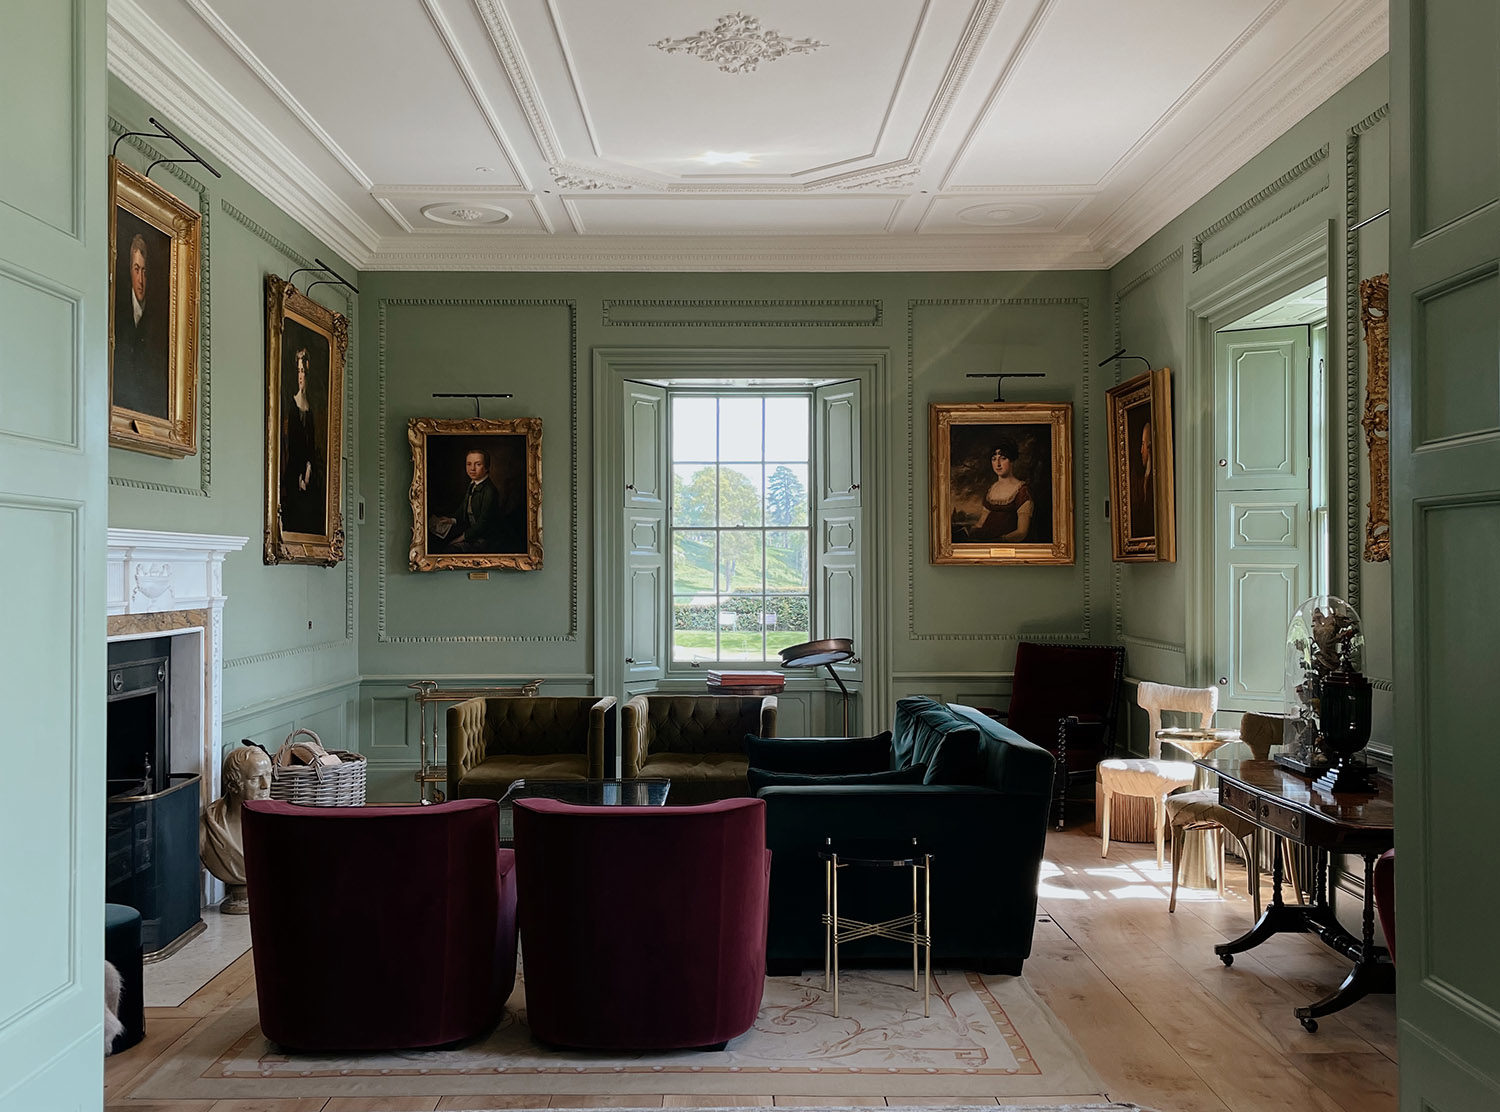 The Newt in Somerset Period features meet contemporary furnishings in the drawing room